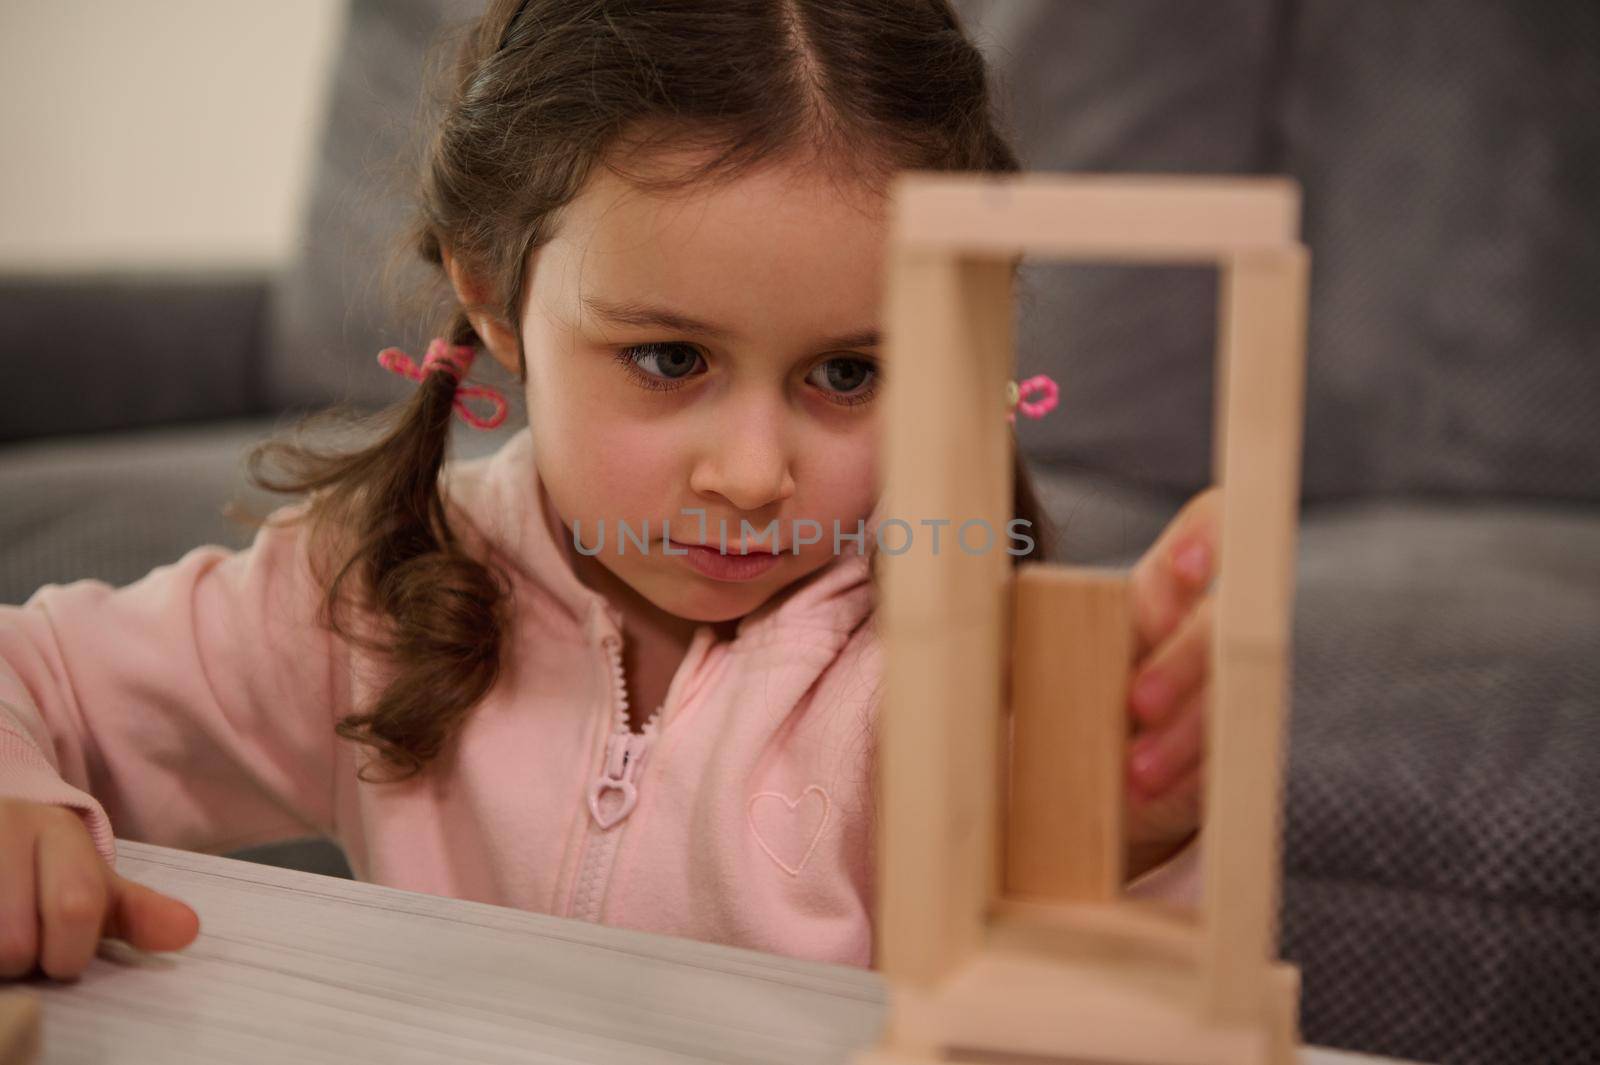 Close-up portrait of adorable child, preschool girl in pink sweatshirt concentrated on building wooden structure with wooden blocks. Board games and fine motor skills development concept by artgf